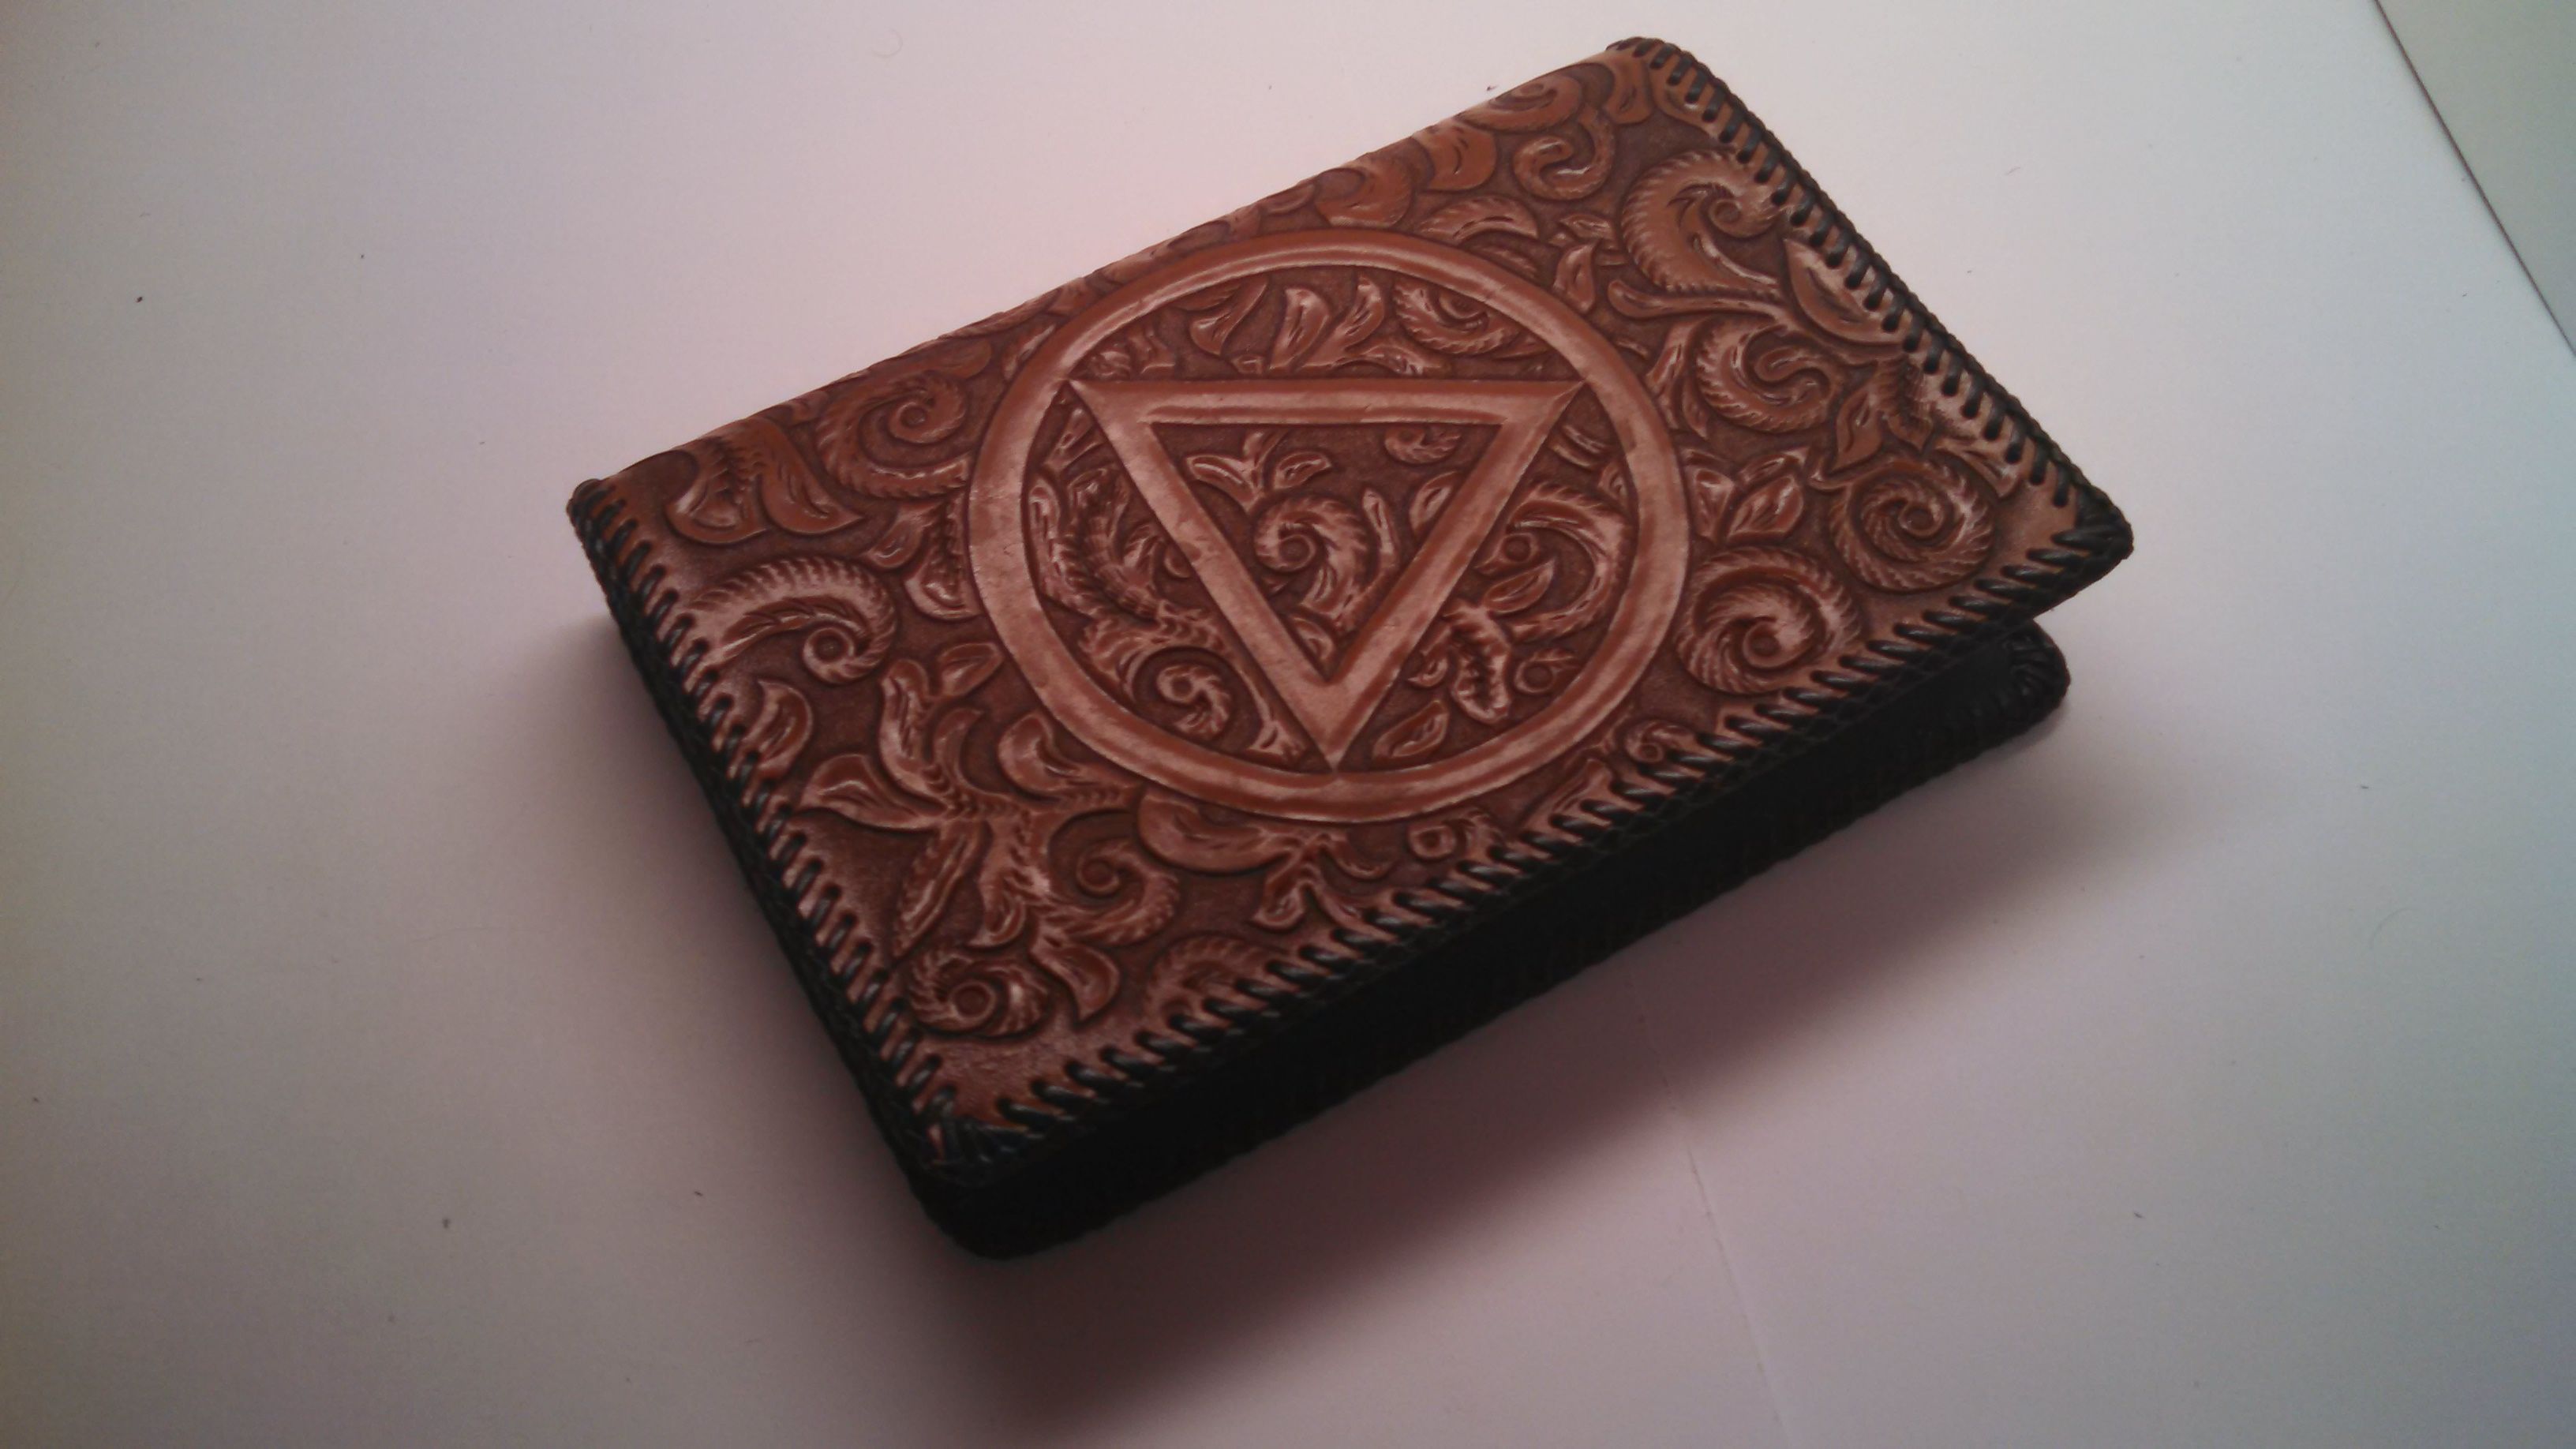 Buy Custom Aa Leather Big Book Cover, made to order from RAllanK Leathercraft